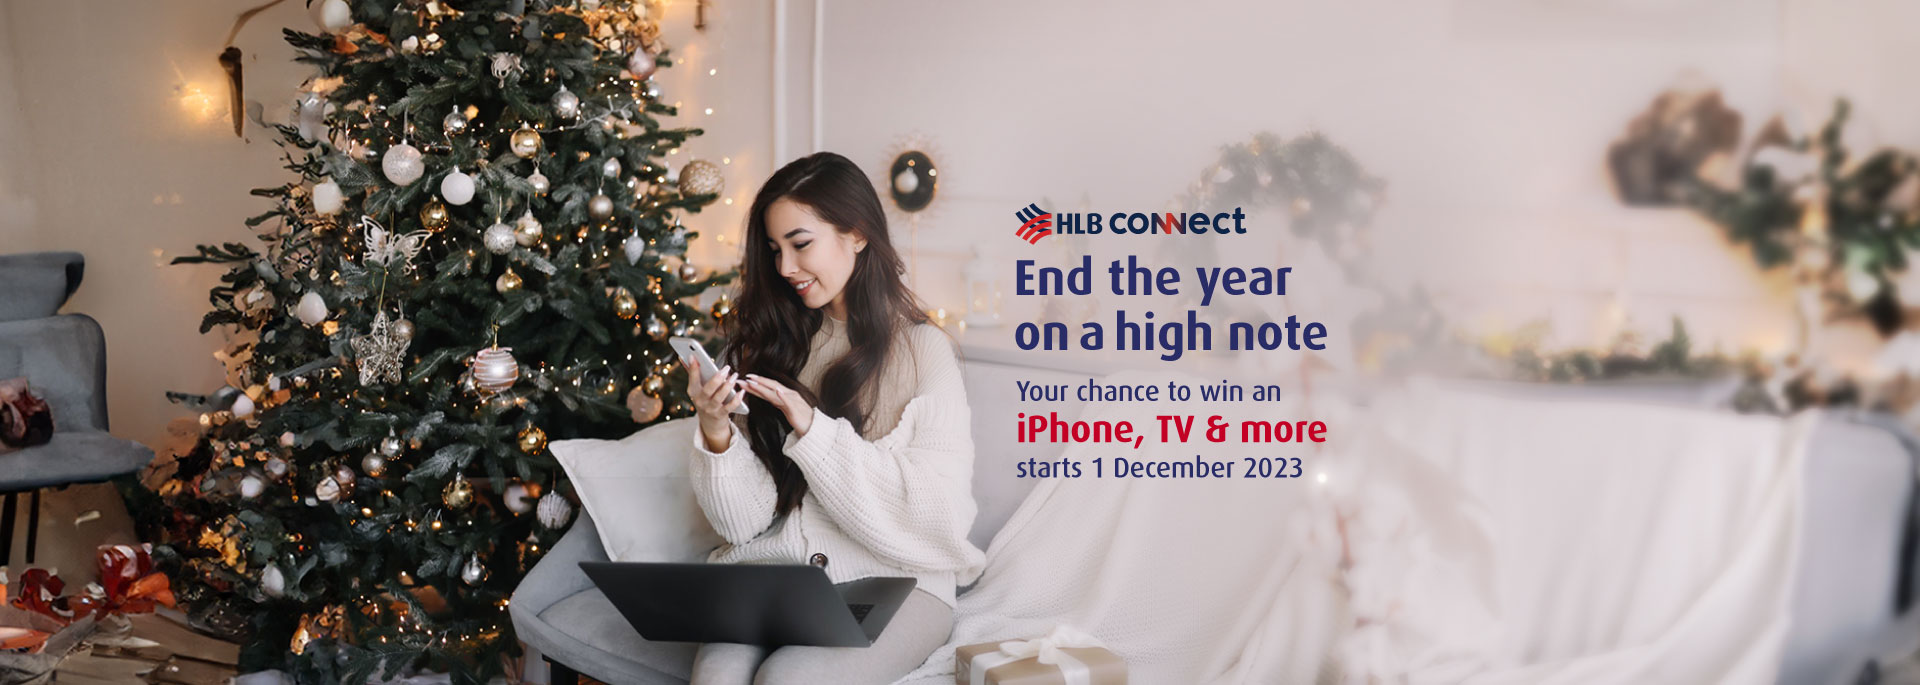 Your chance to win an iPhone, TV & more